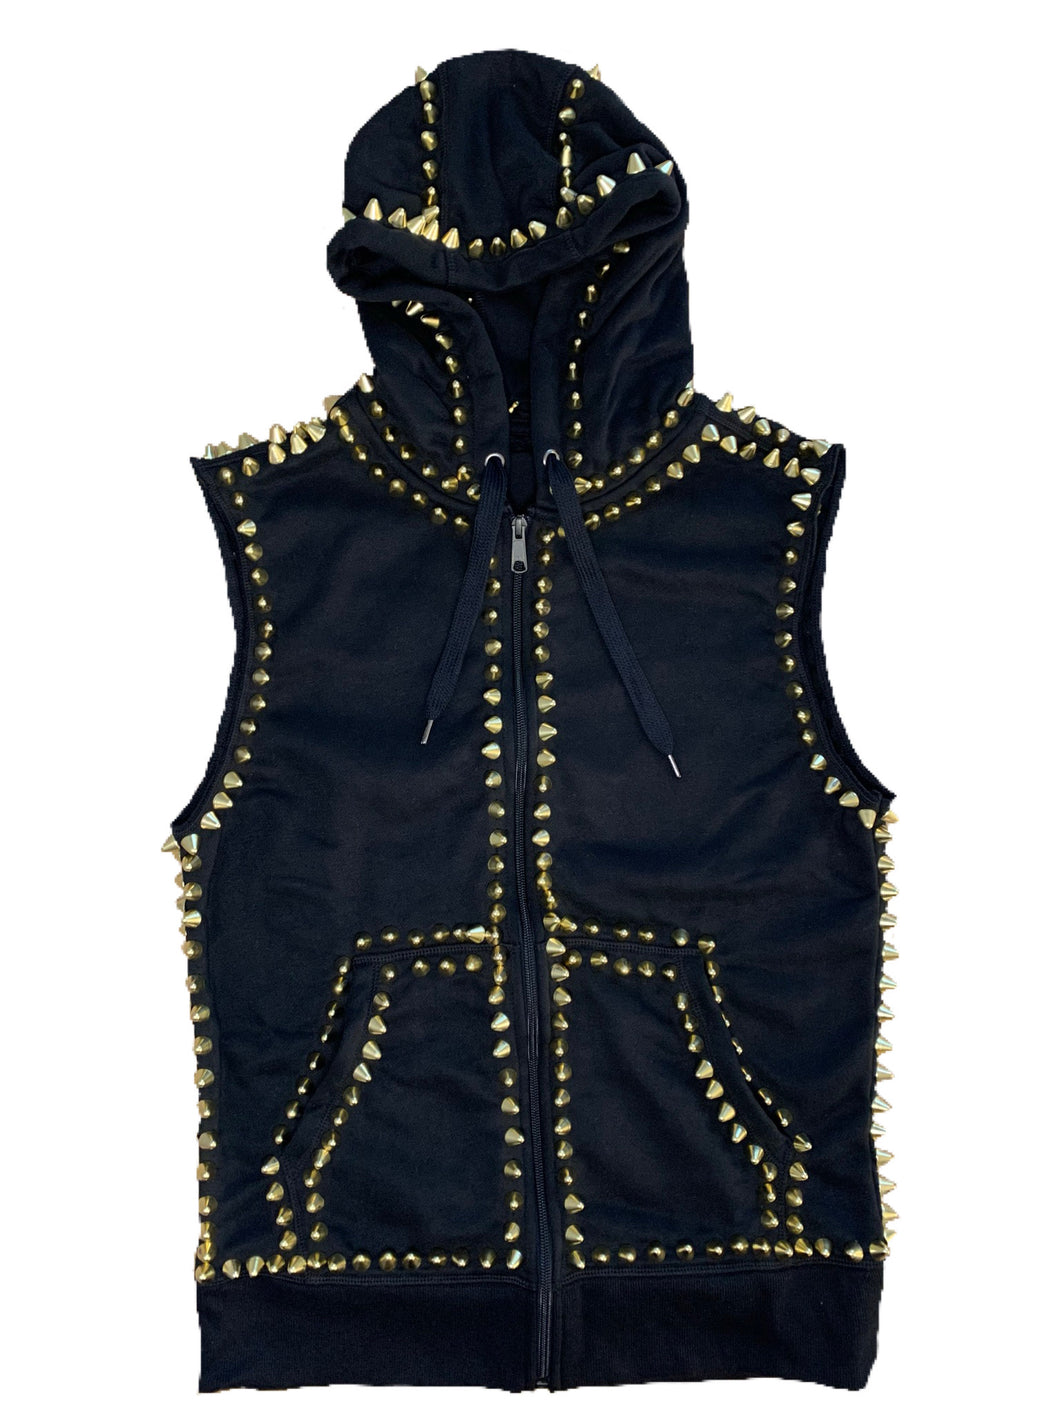 Studmuffin NYC Spike Hoodie 2.0 Zip Up, Sleeveless - More Colors